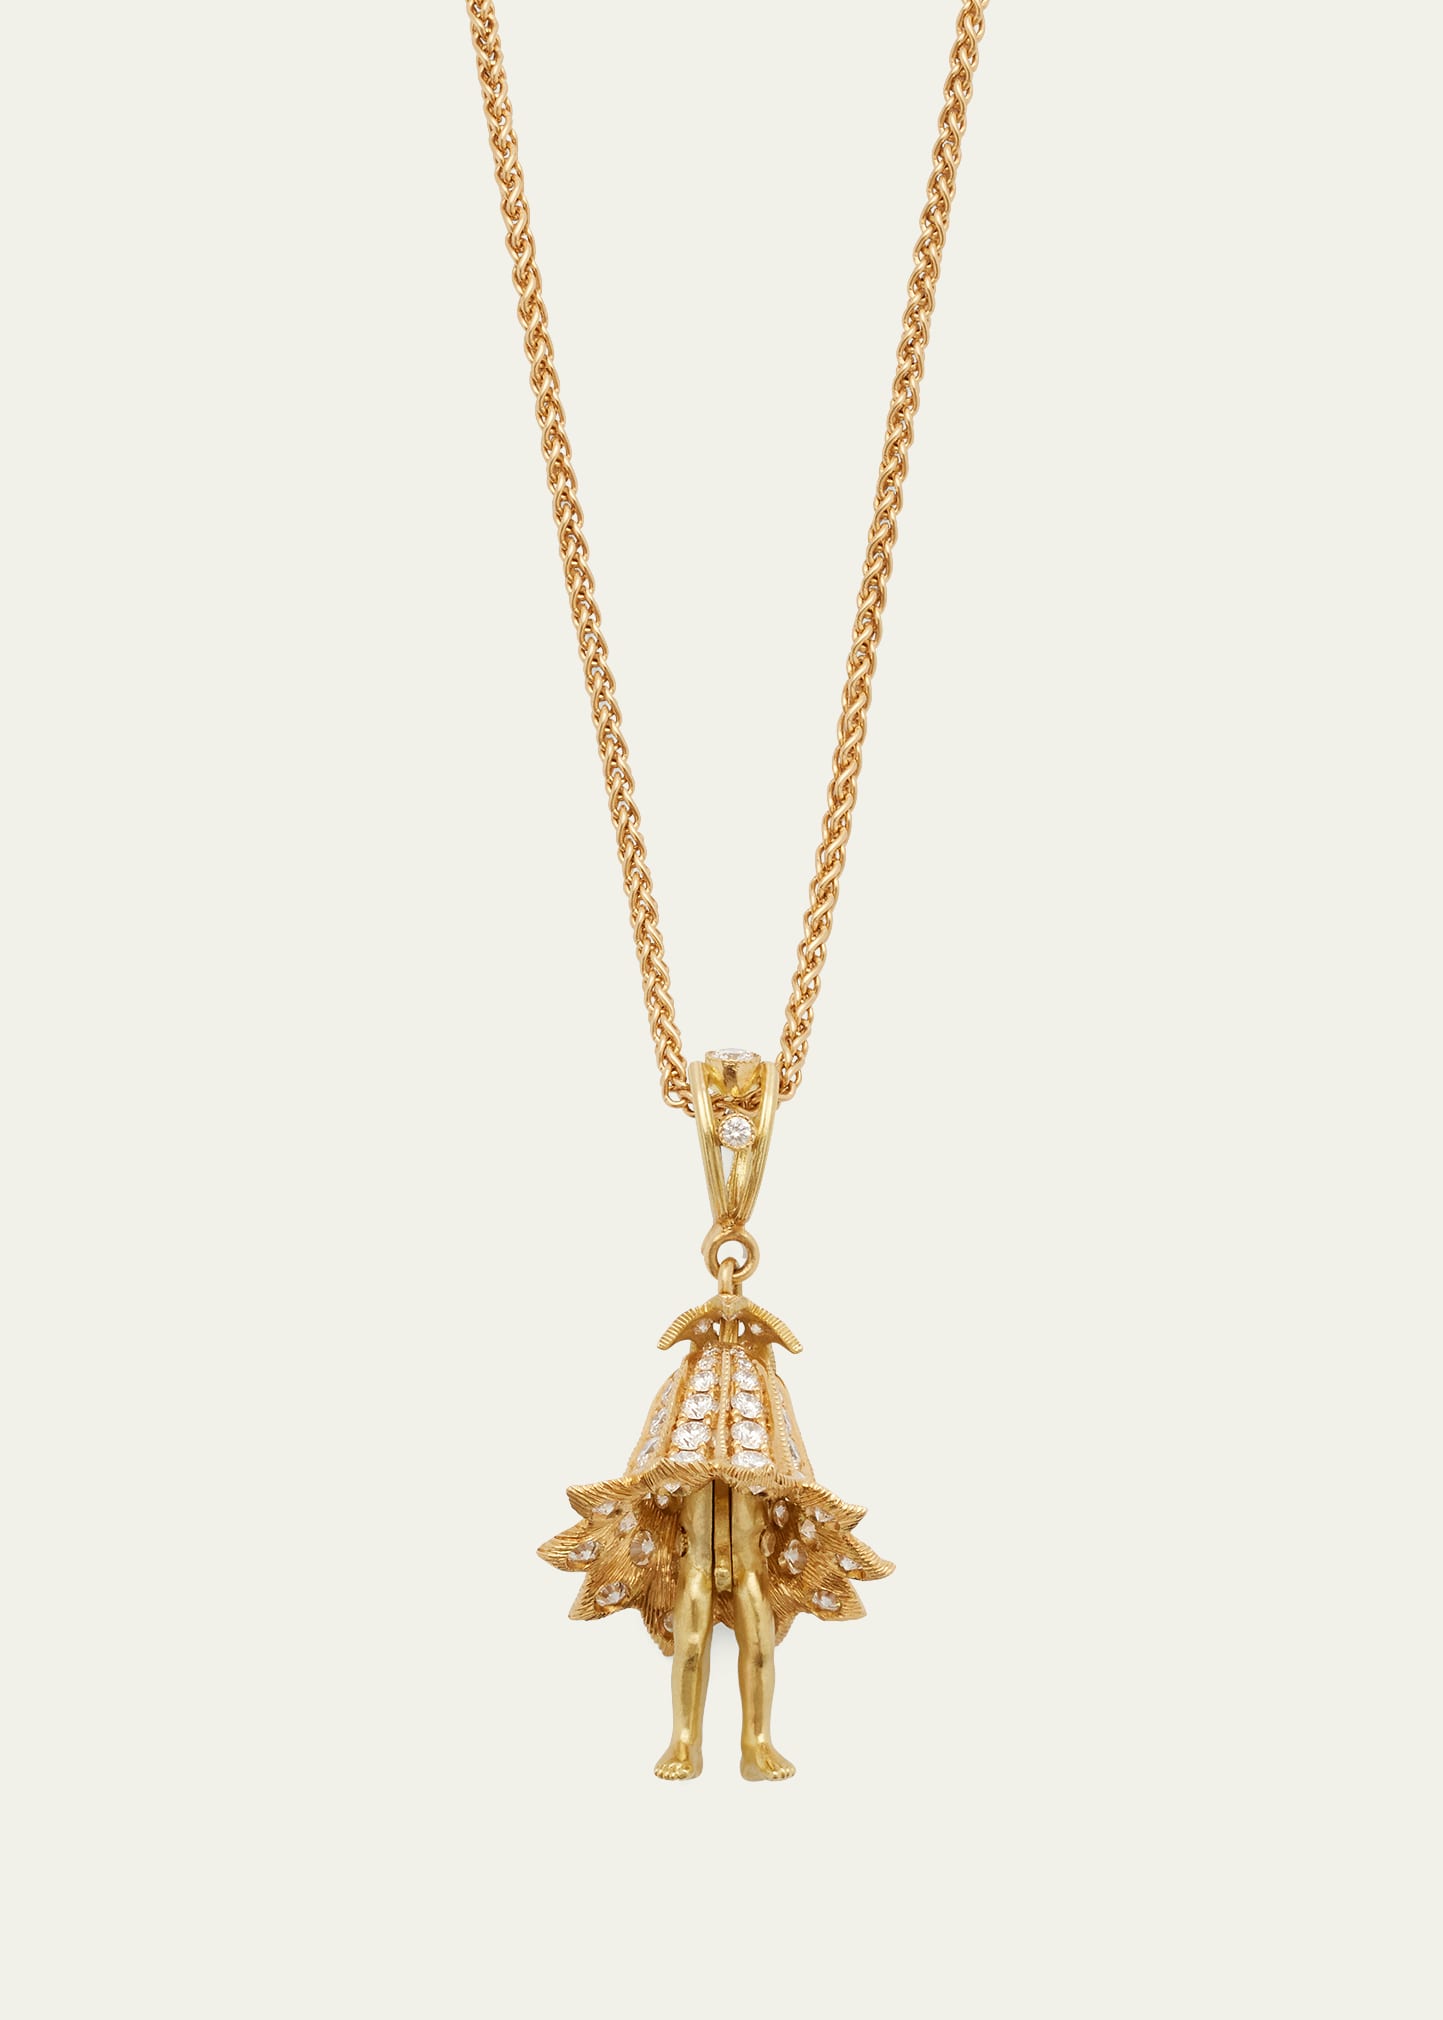 Anthony Lent Flower Child Pendant Necklace in 18k Gold and Diamond